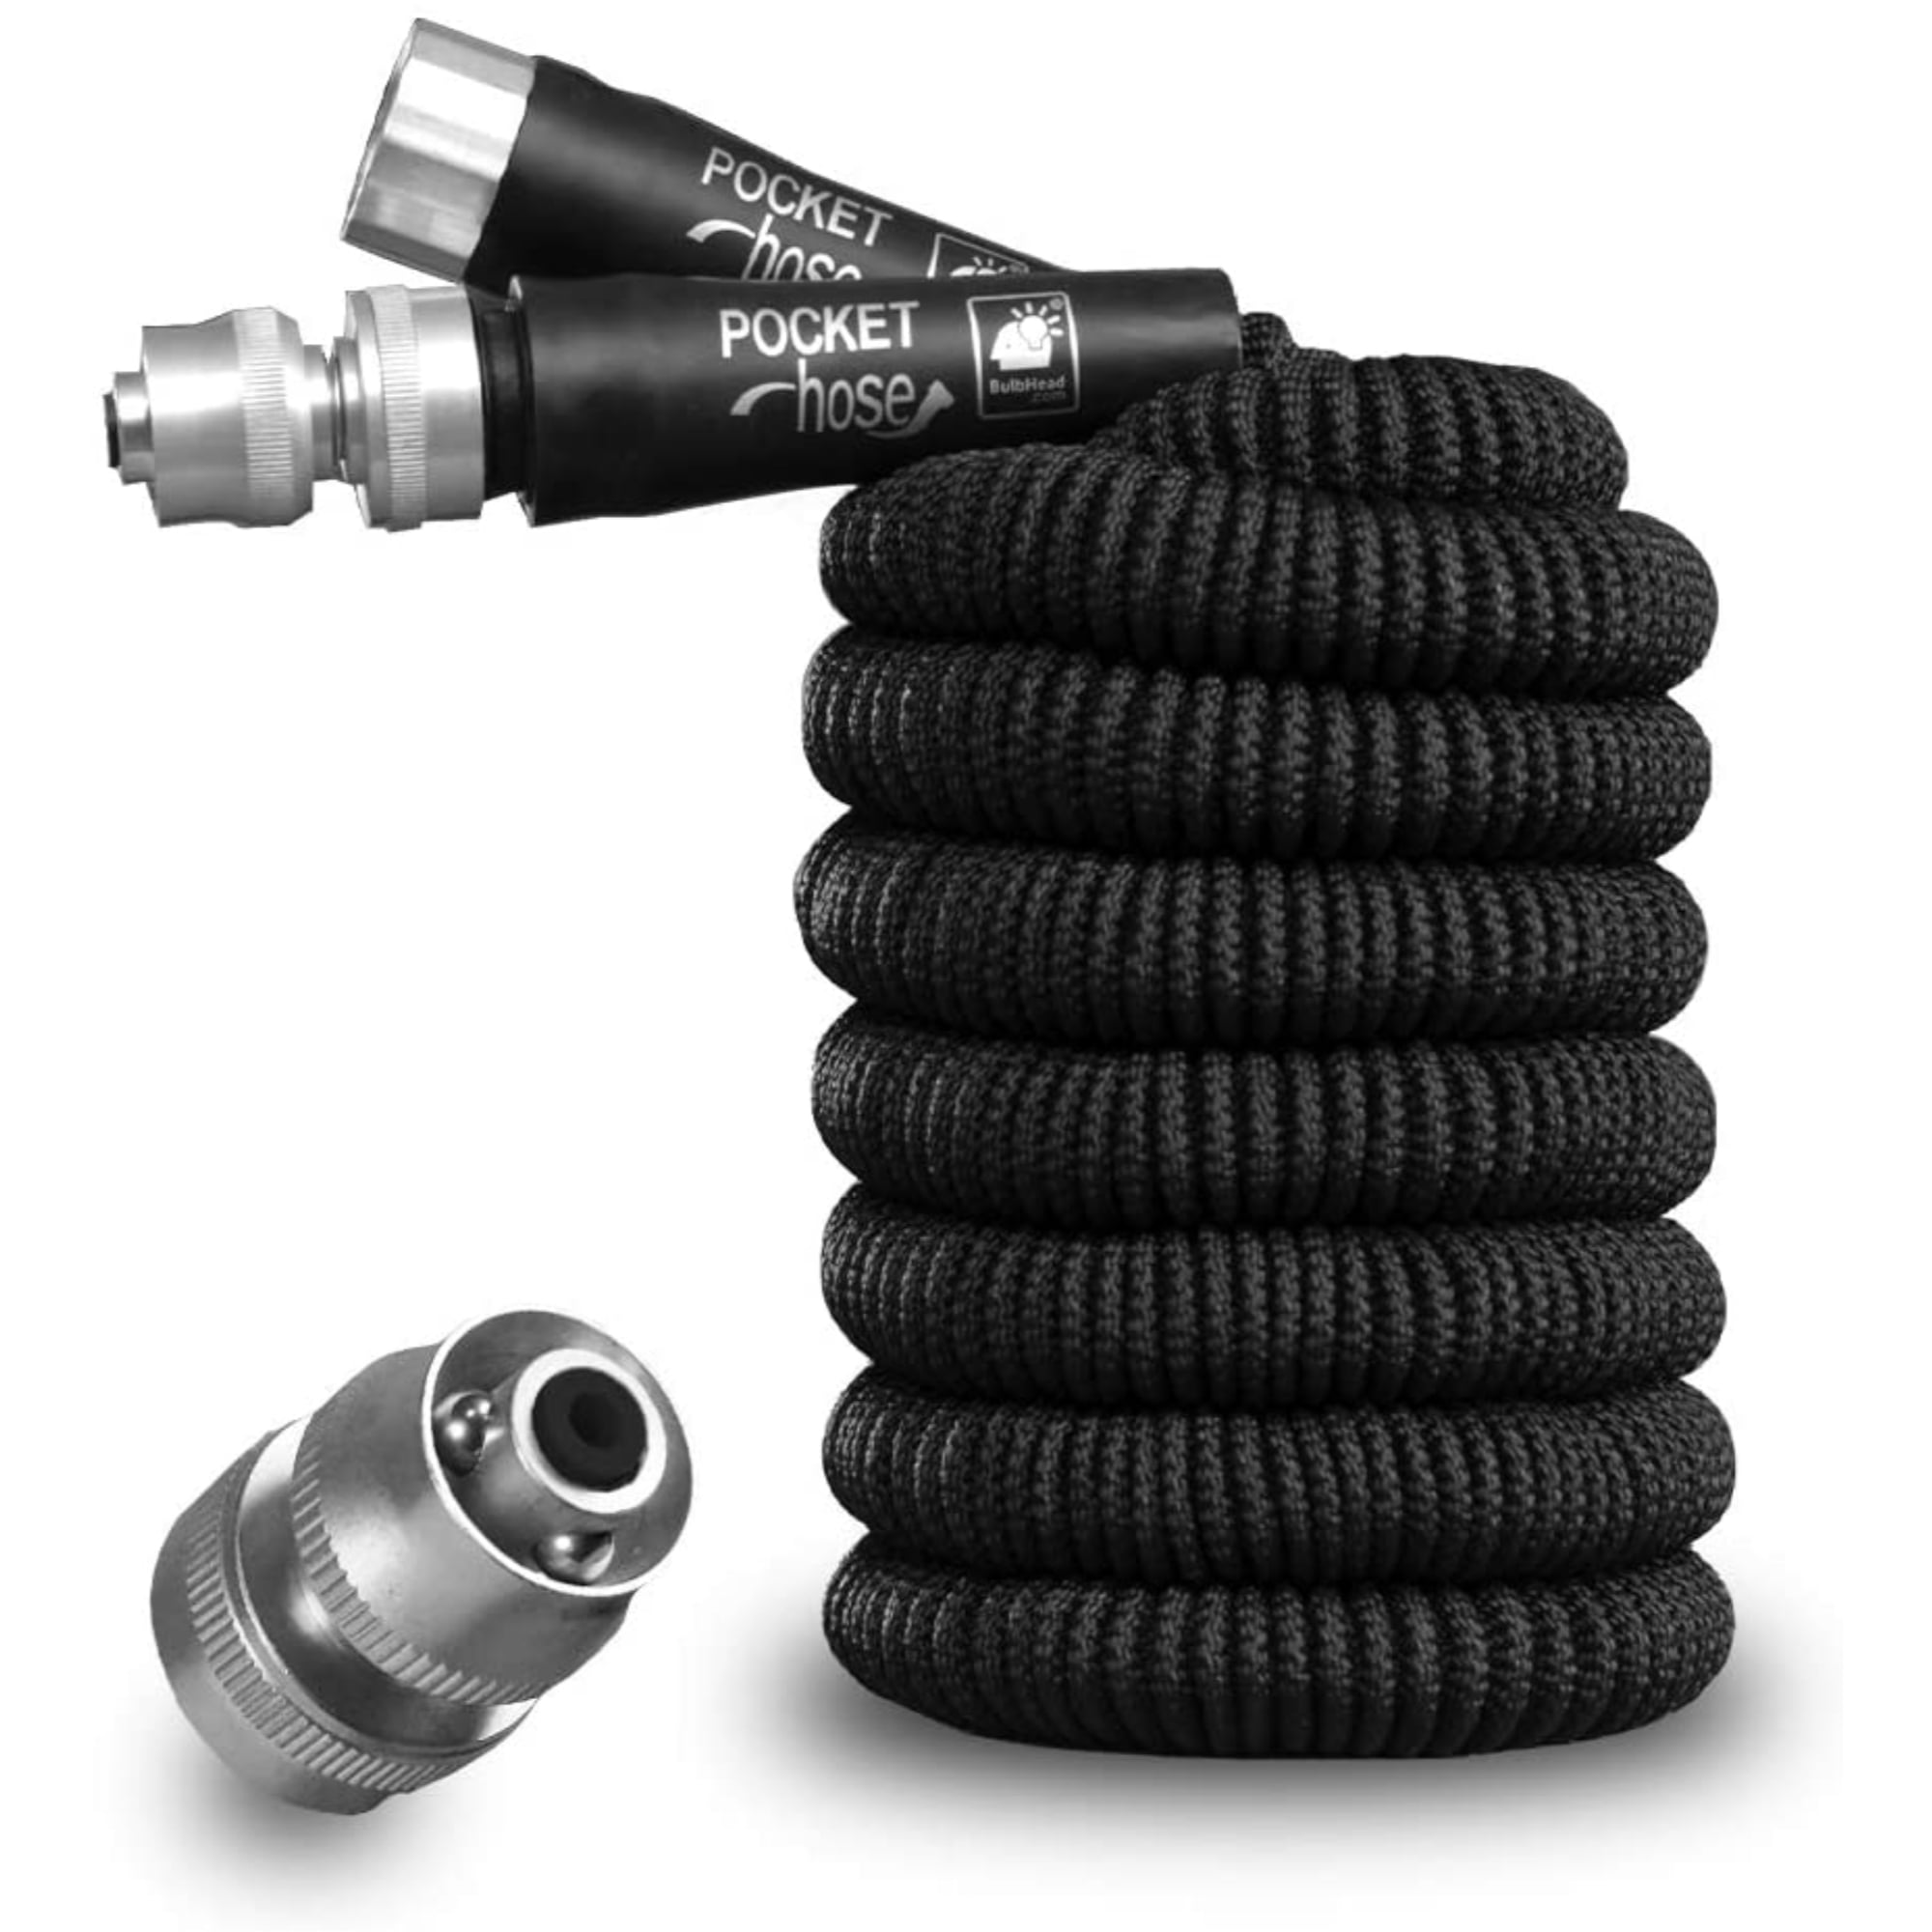 Expandable Hose Aluminum BulbHead, Pocket Bullet Connectors with Hose by Water Hose Silver Lead-Free